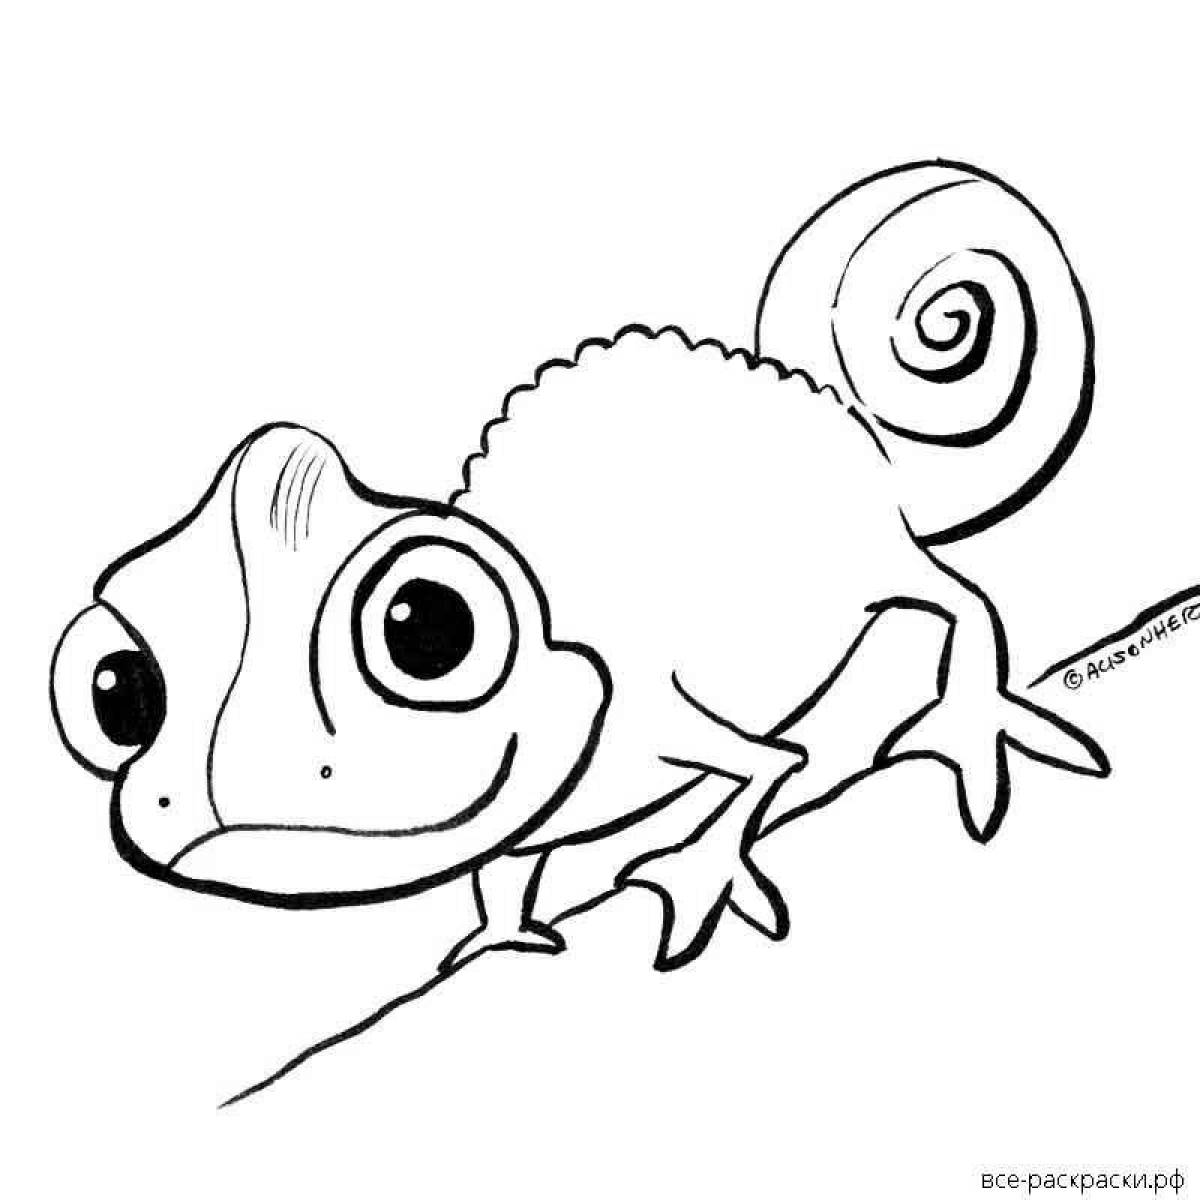 Amazing chameleon coloring page